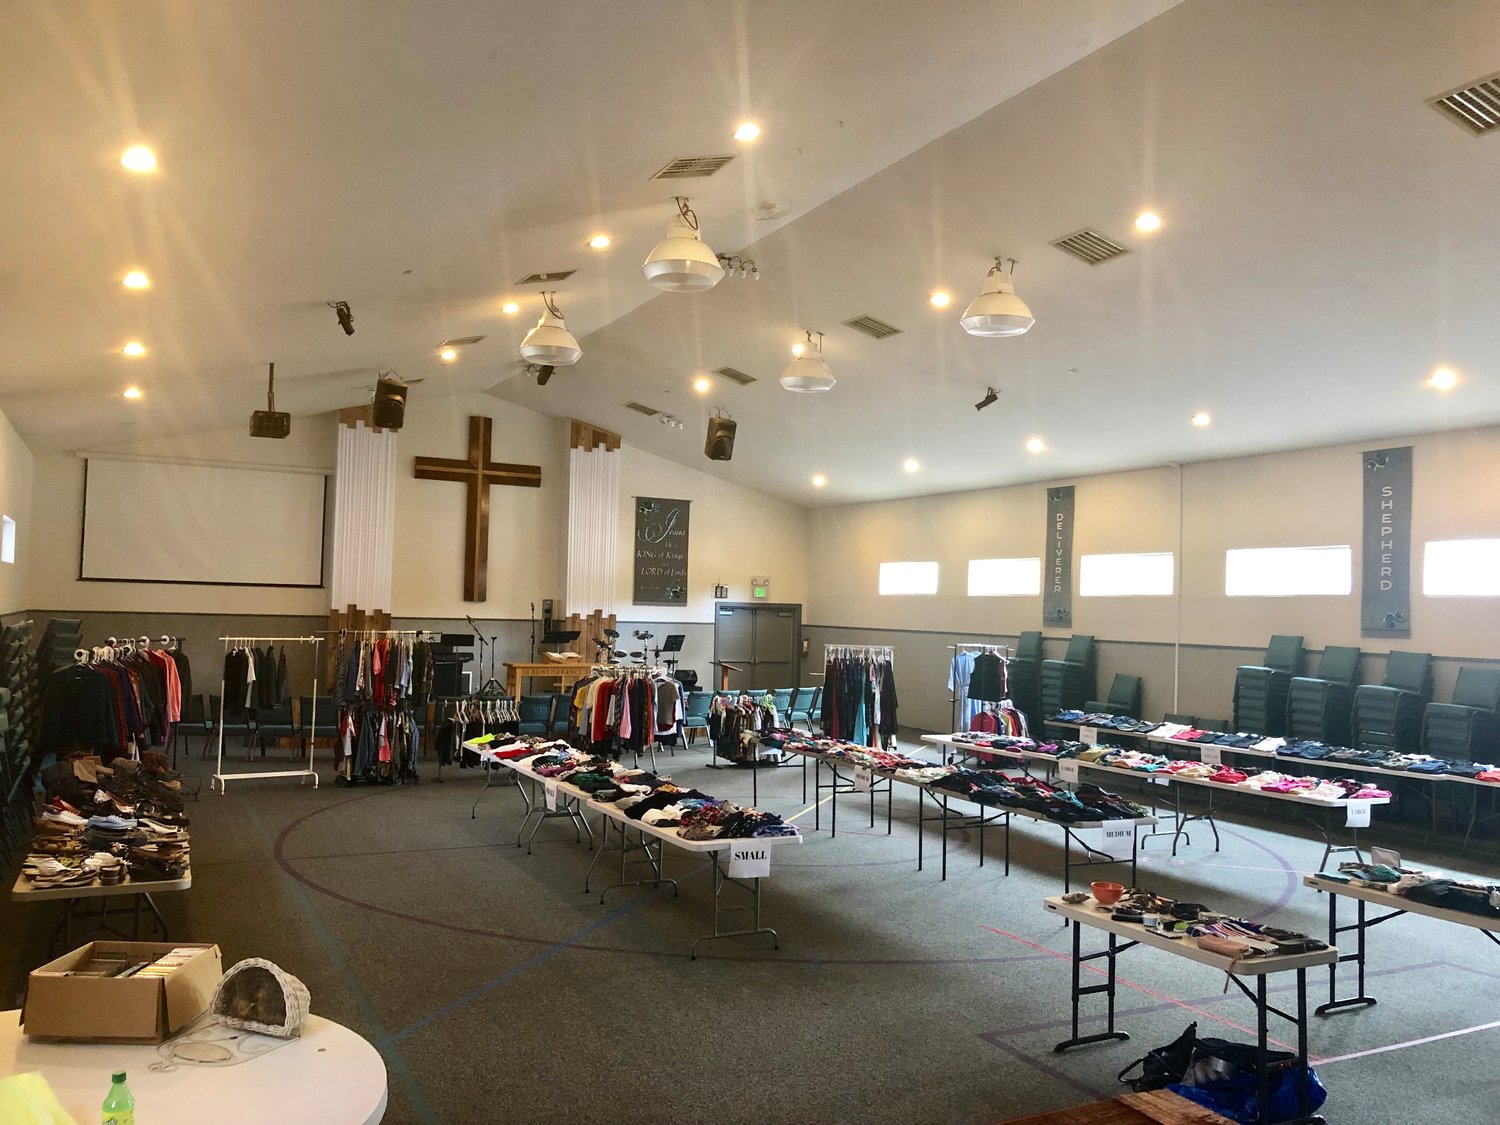 A previous clothing drive is pictured inside the Yacolt Community Church.